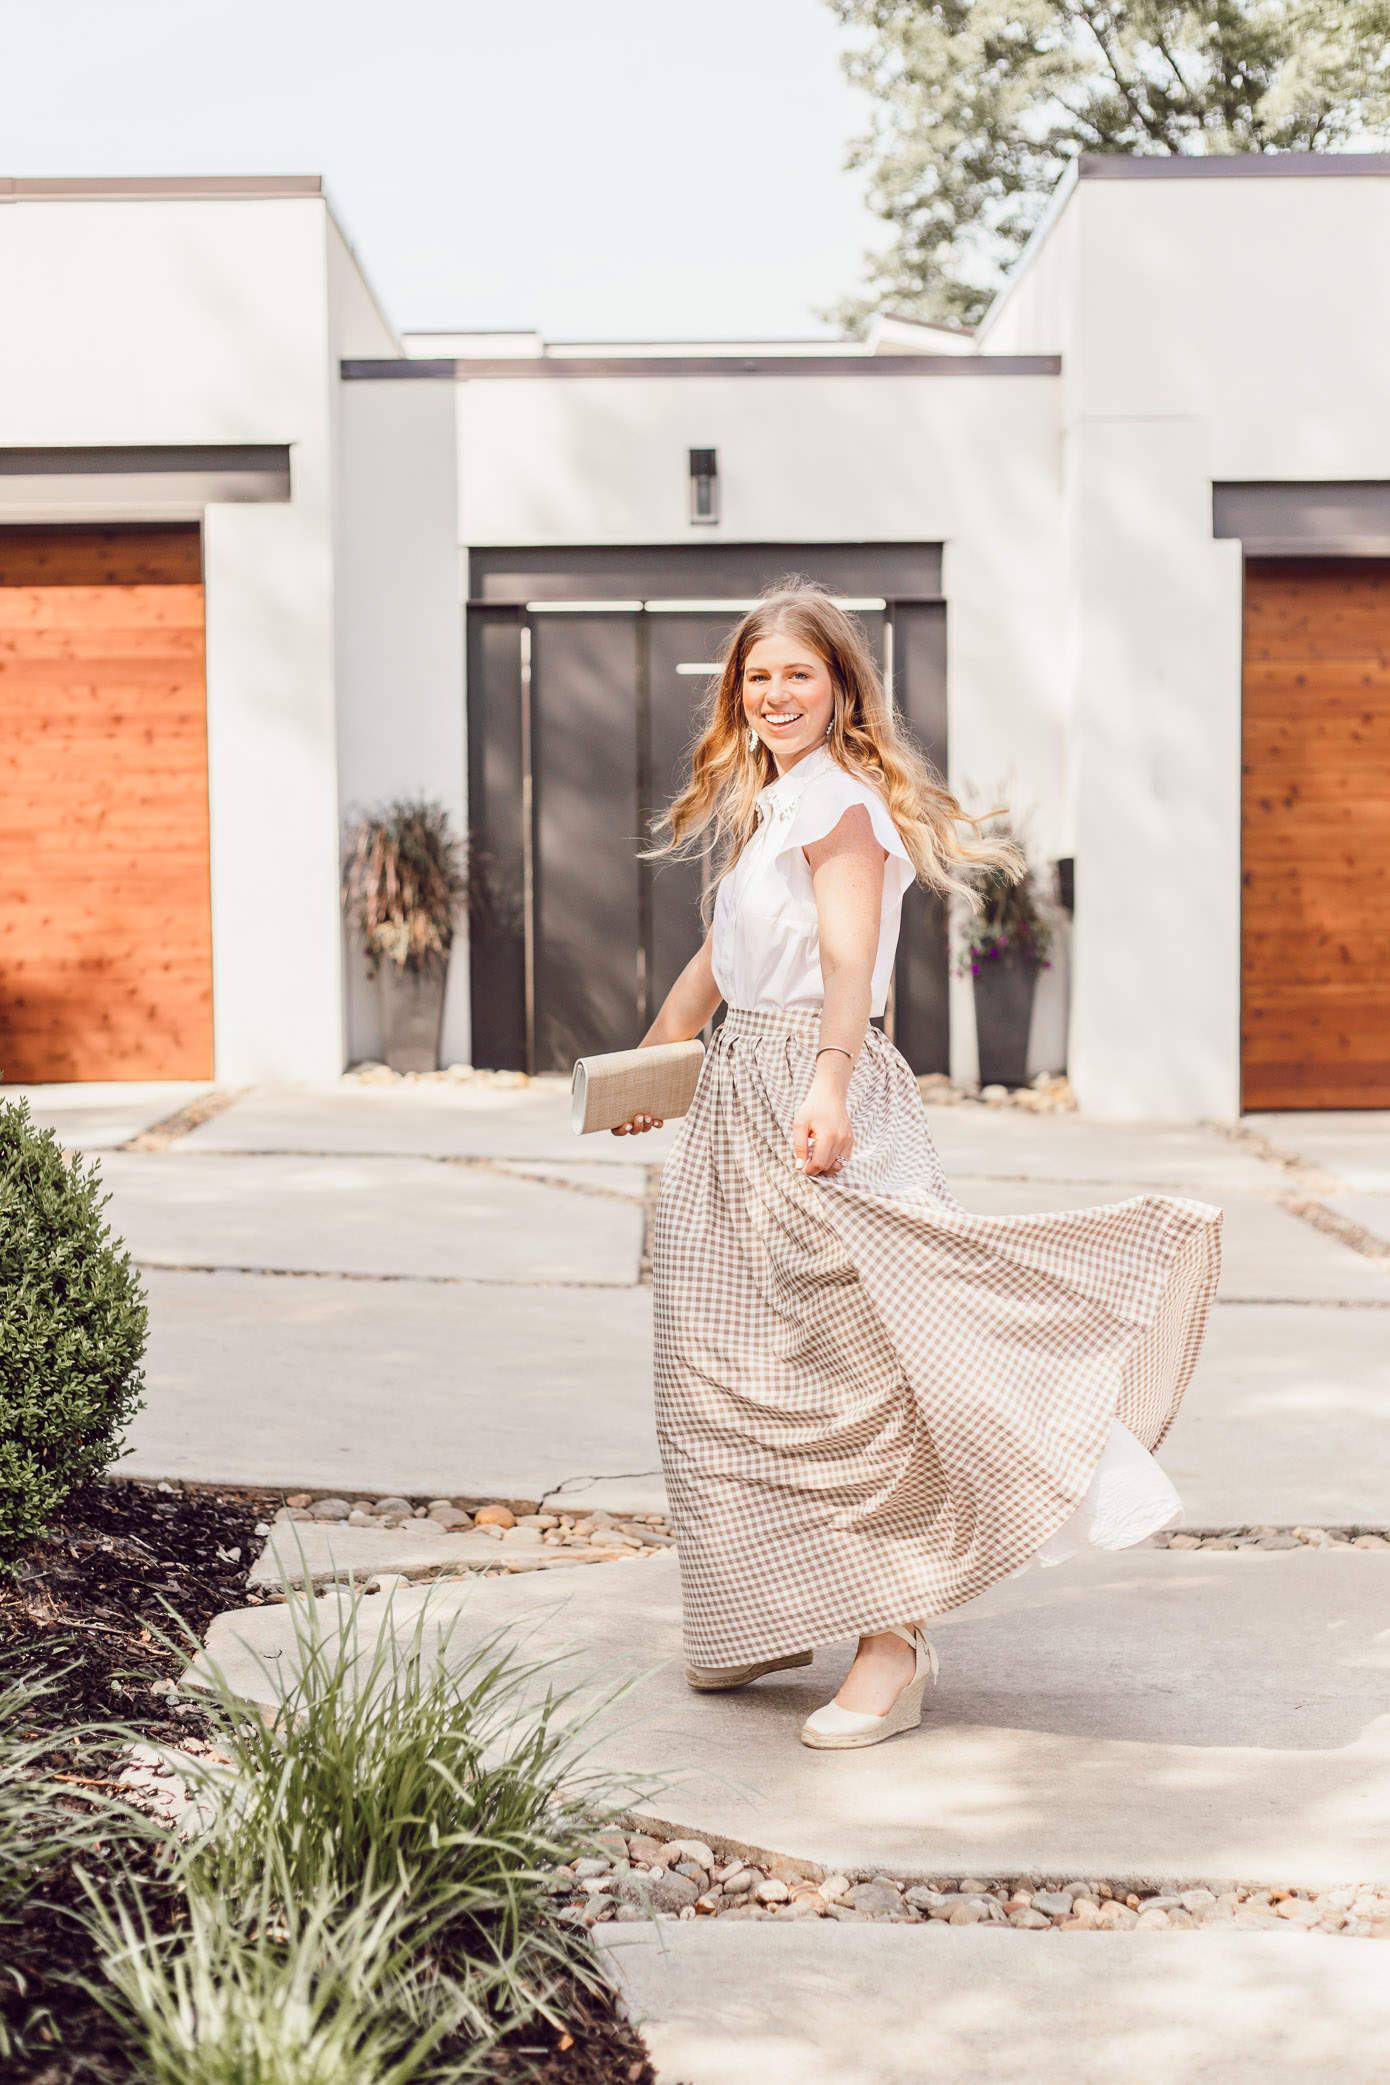 How to Style a Maxi Skirt for Summer - A Summer Gingham Maxi Skirt styled by Laura Leigh of Louella Reese #maxiskirt #gingham #southernstyle